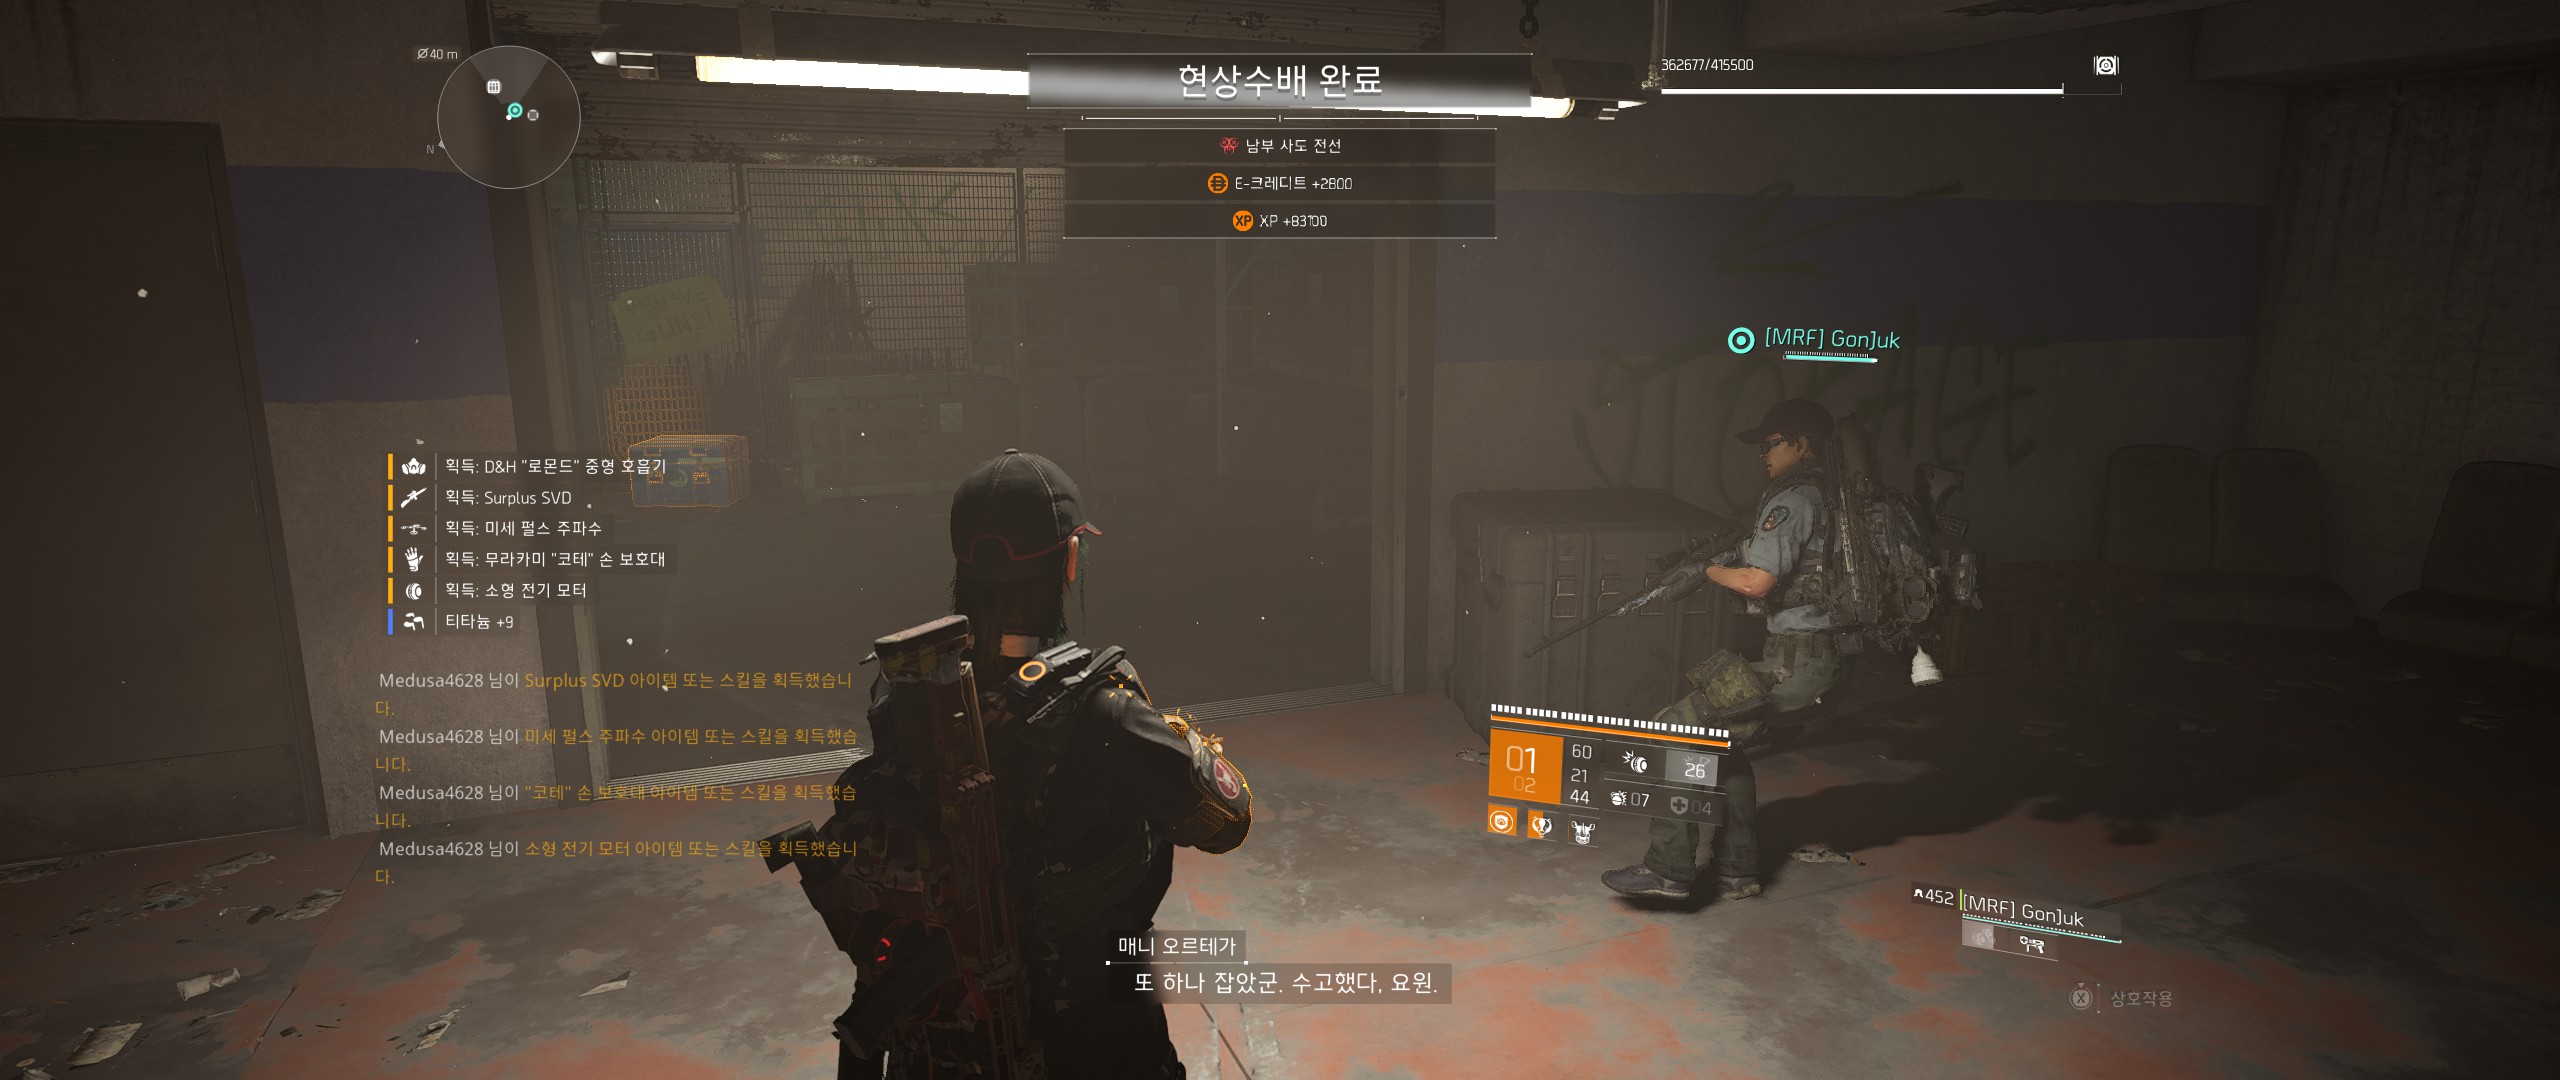 Tom Clancy's The Division® 22019-3-31-21-28-10.jpg